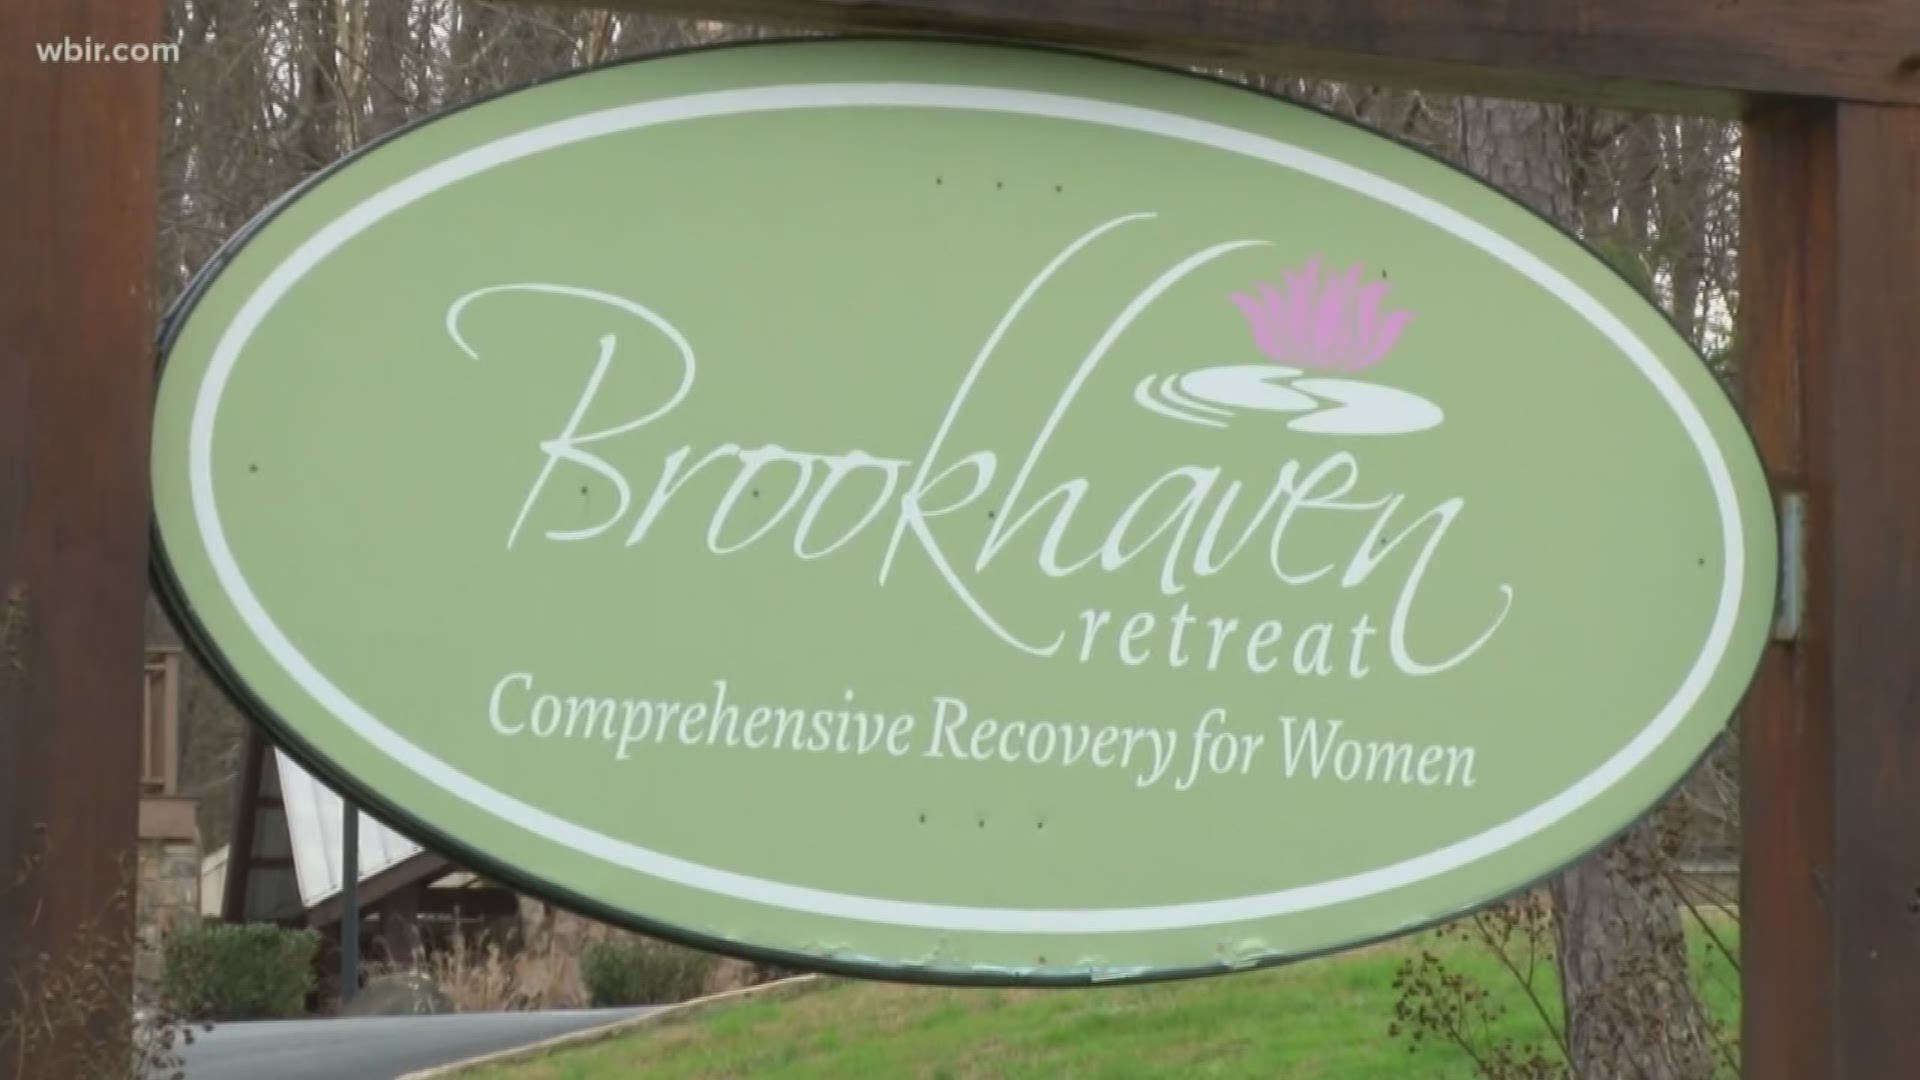 An exclusive treatment center for women in Blount County faced a barrage of legal and financial problems in the months before abruptly closing its doors.